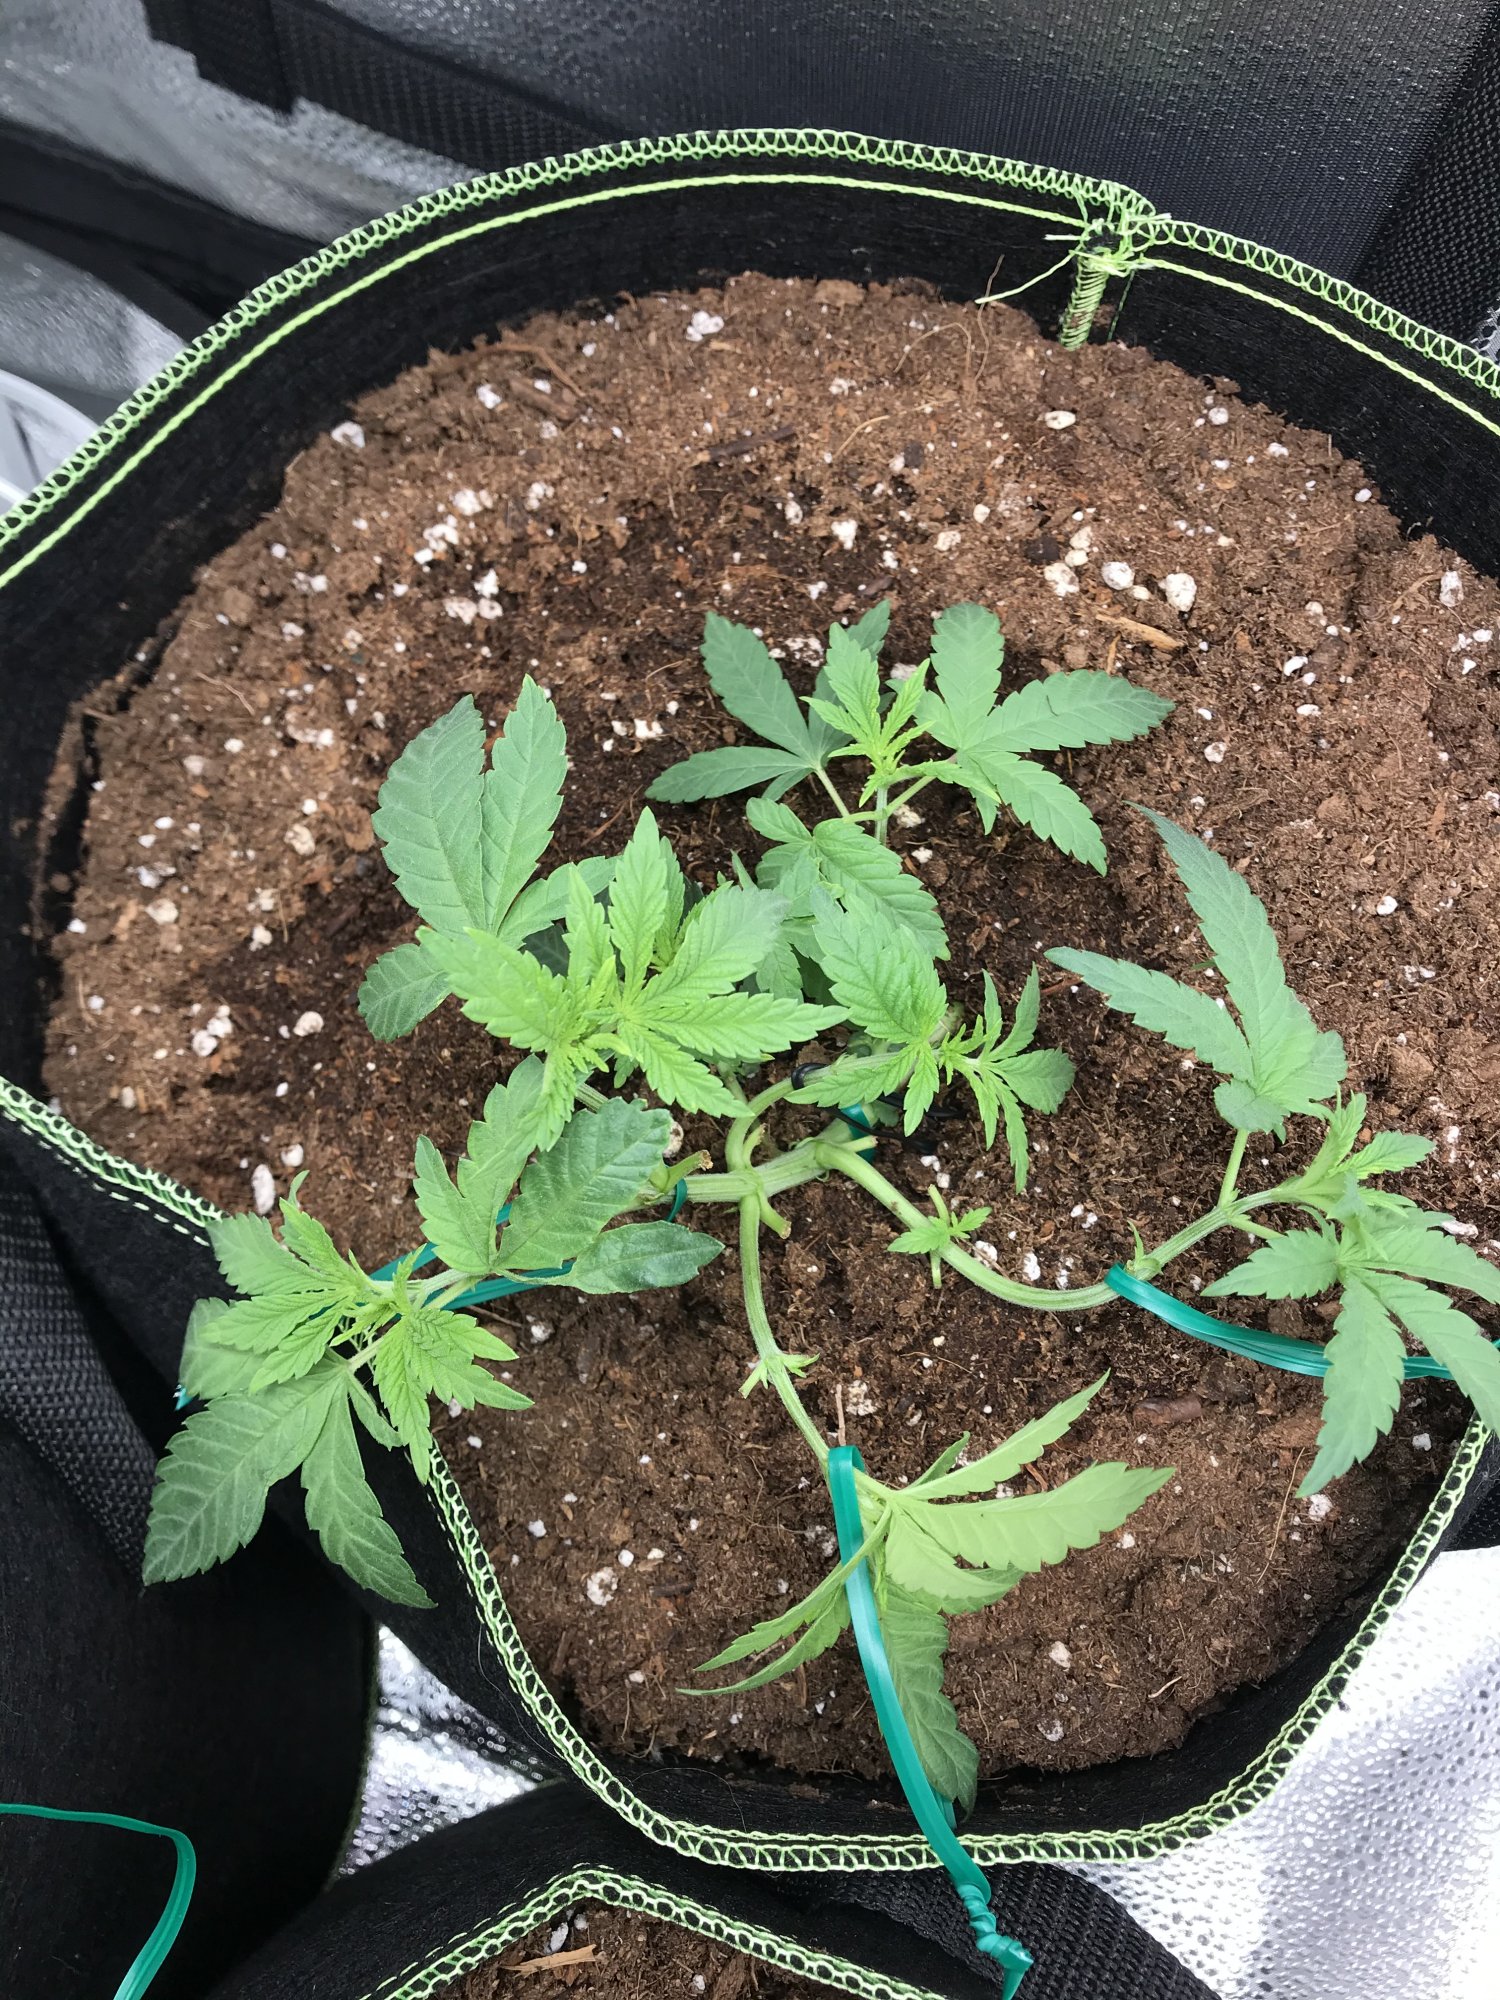 Spider farmer sf 1000 grow tent 1st time tent grower would like help with what im doing right